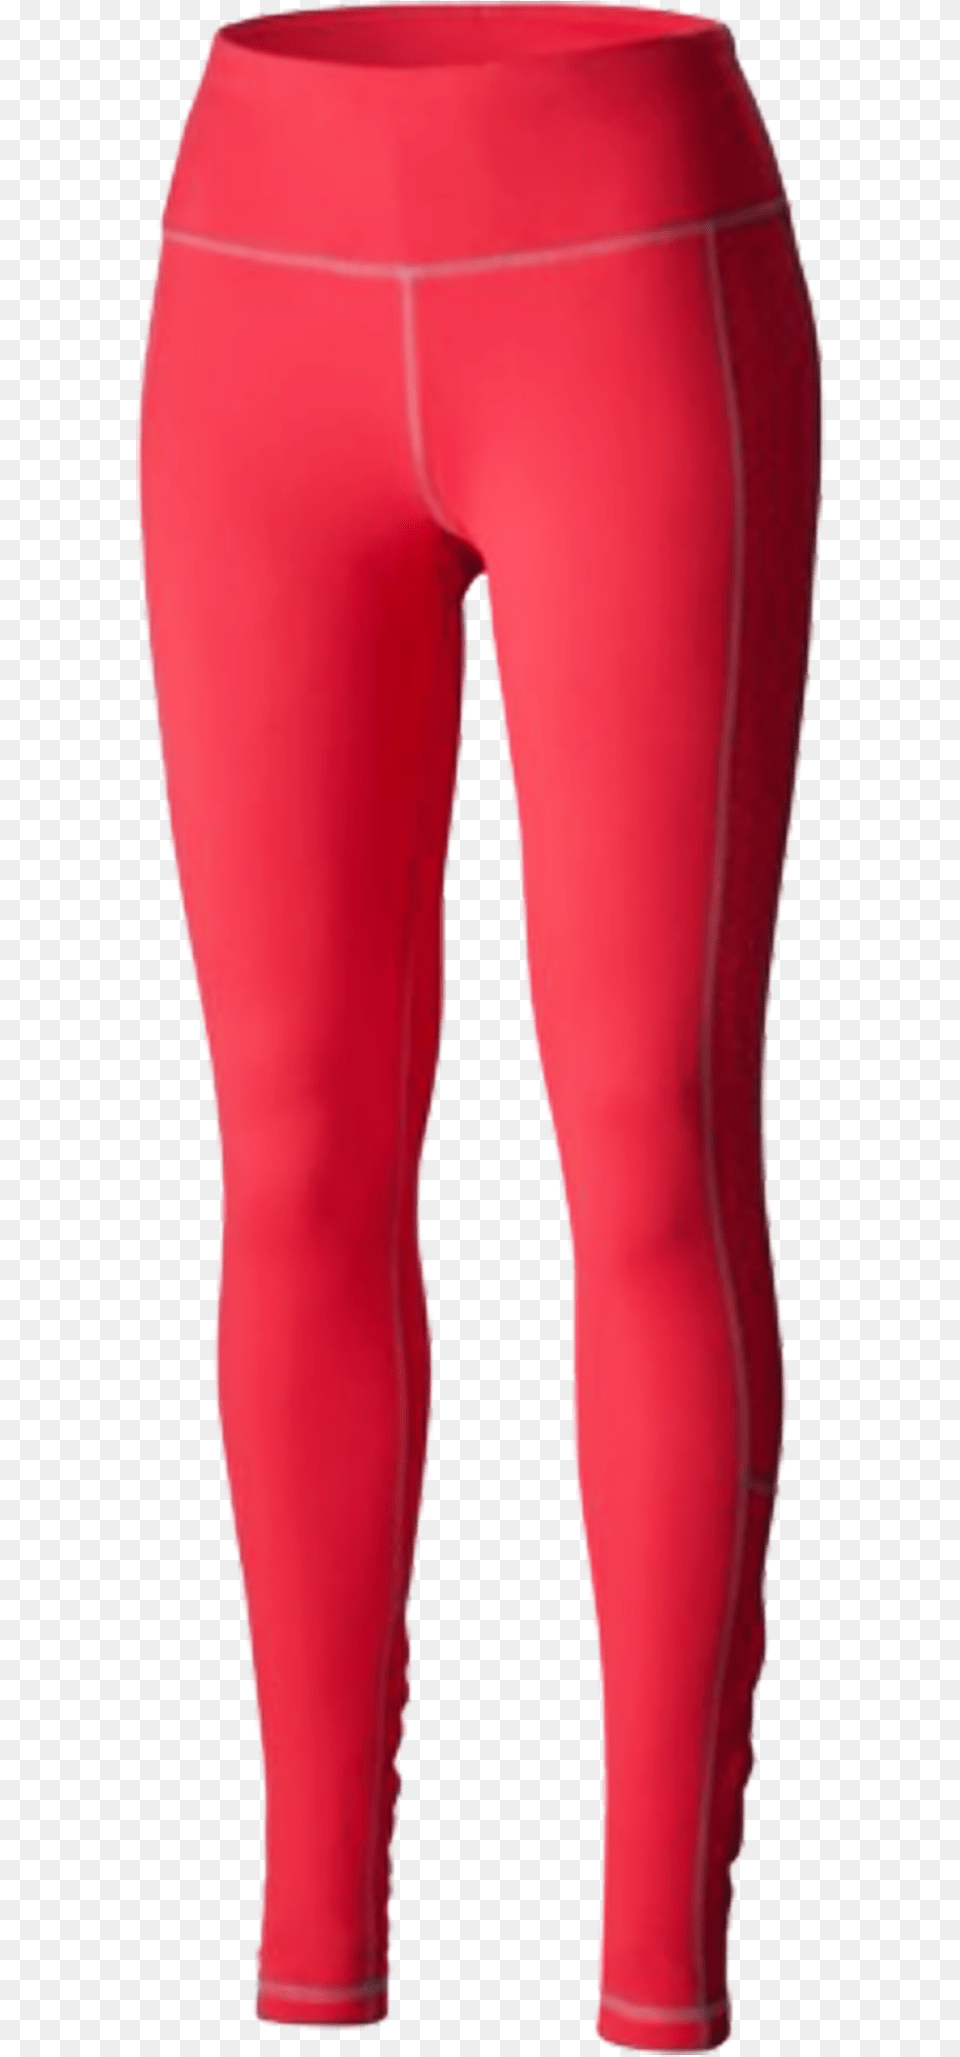 Columbia Women39s Trail Flash Legging Pant Tights, Clothing, Hosiery, Pants, Bottle Png Image